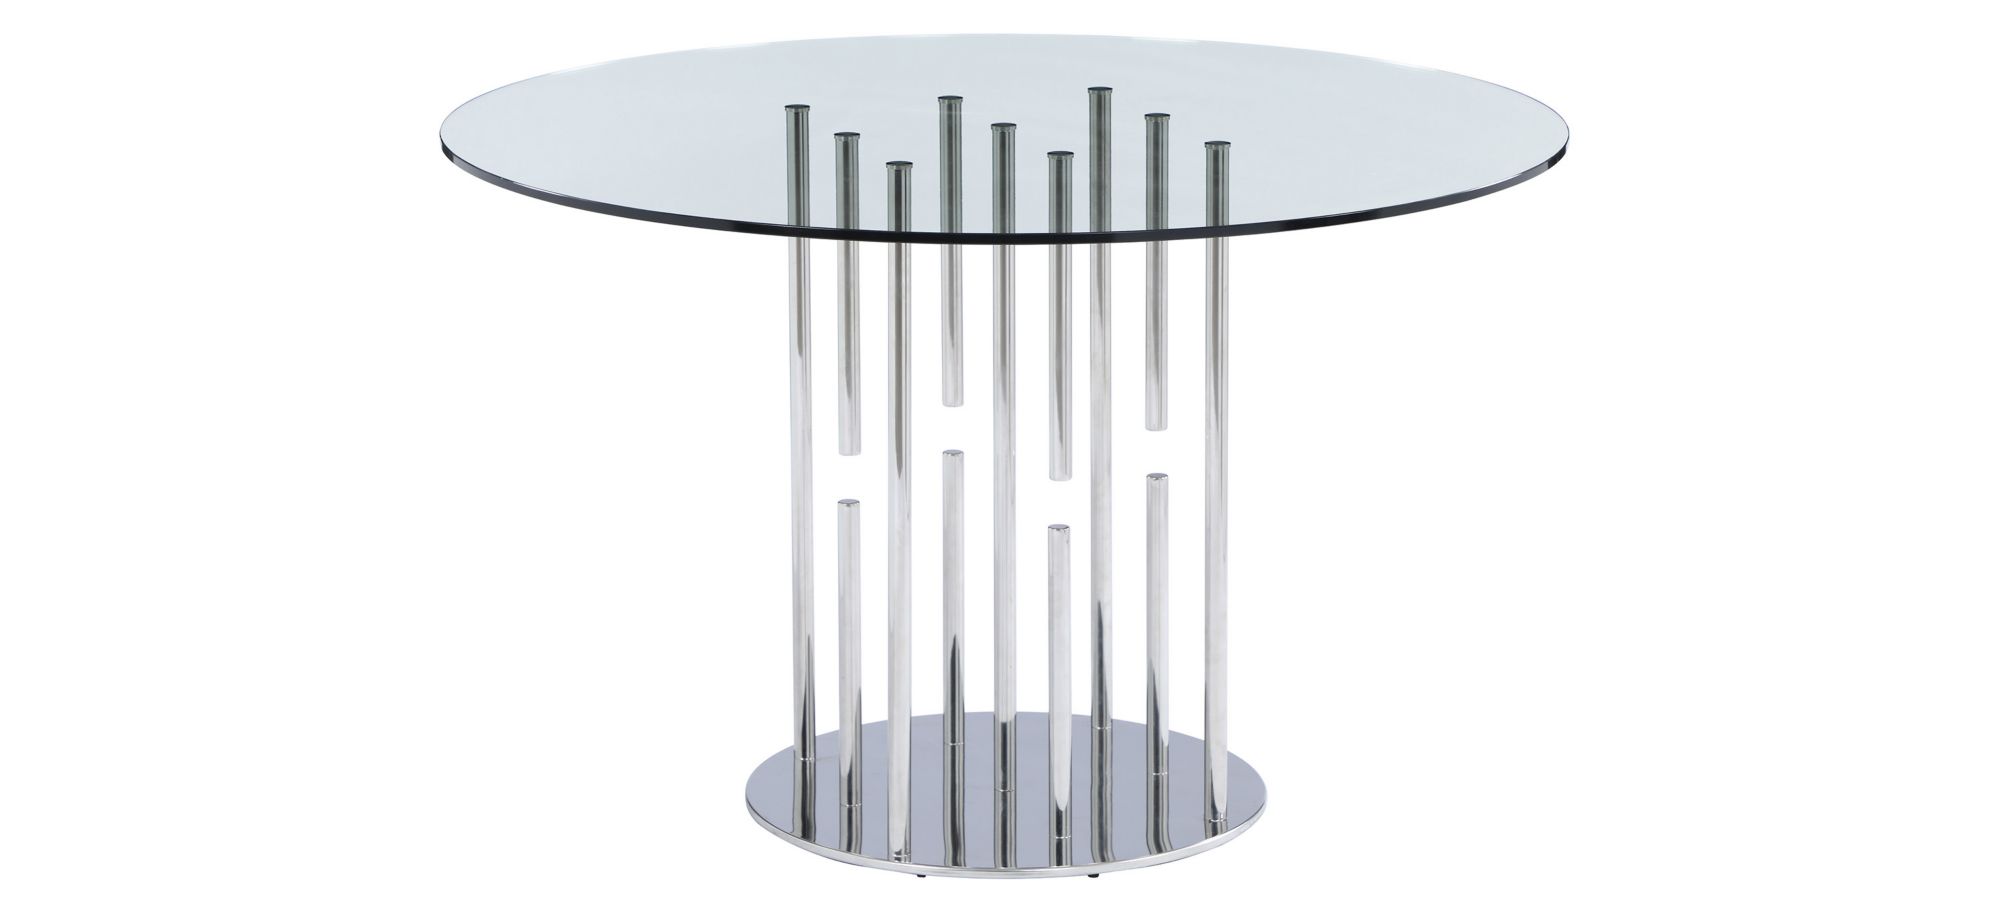 Prosper Pedestal Dining Table in Silver by Chintaly Imports